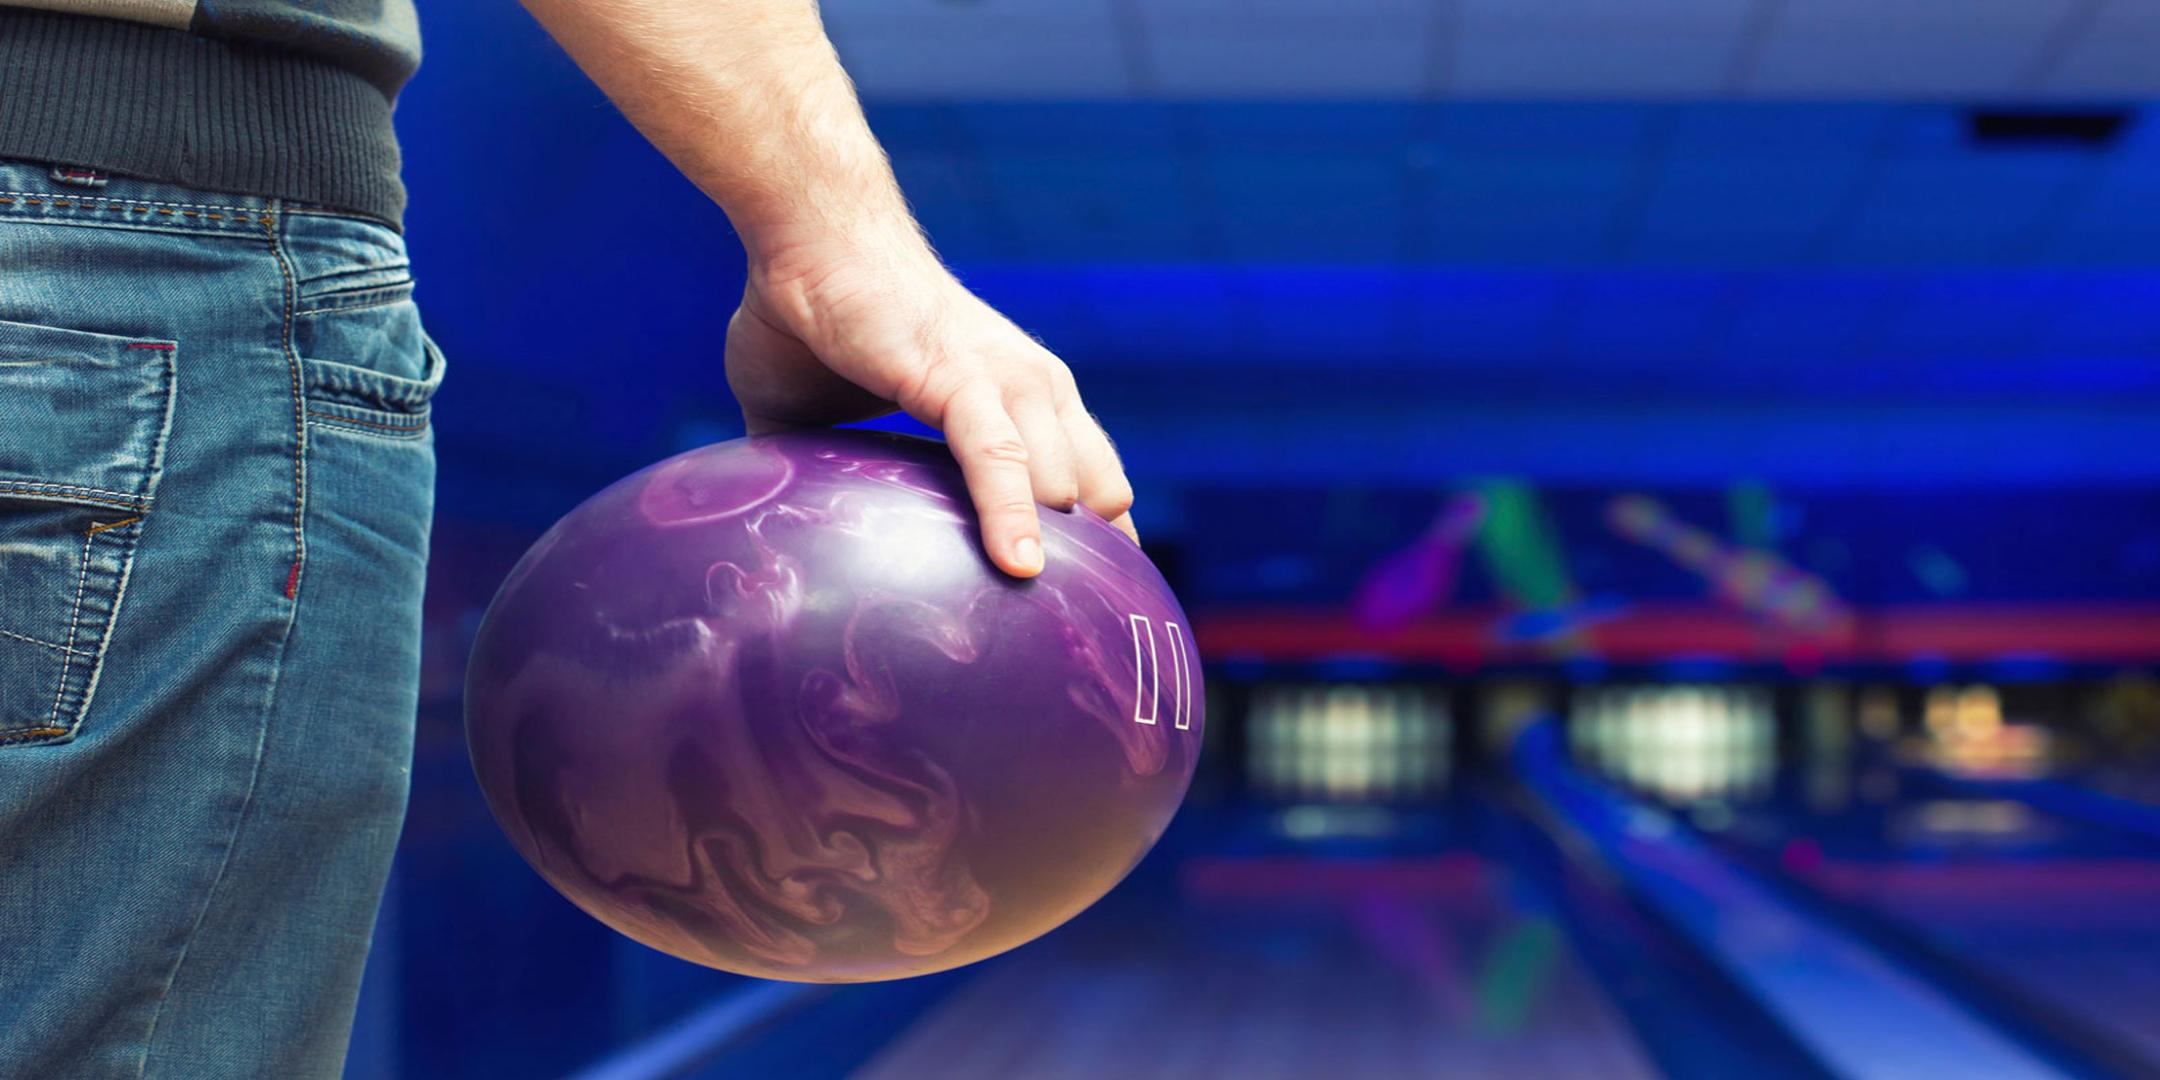 Get a reservation for Unlimited Glow Bowl for up to 6 bowlers $59.99